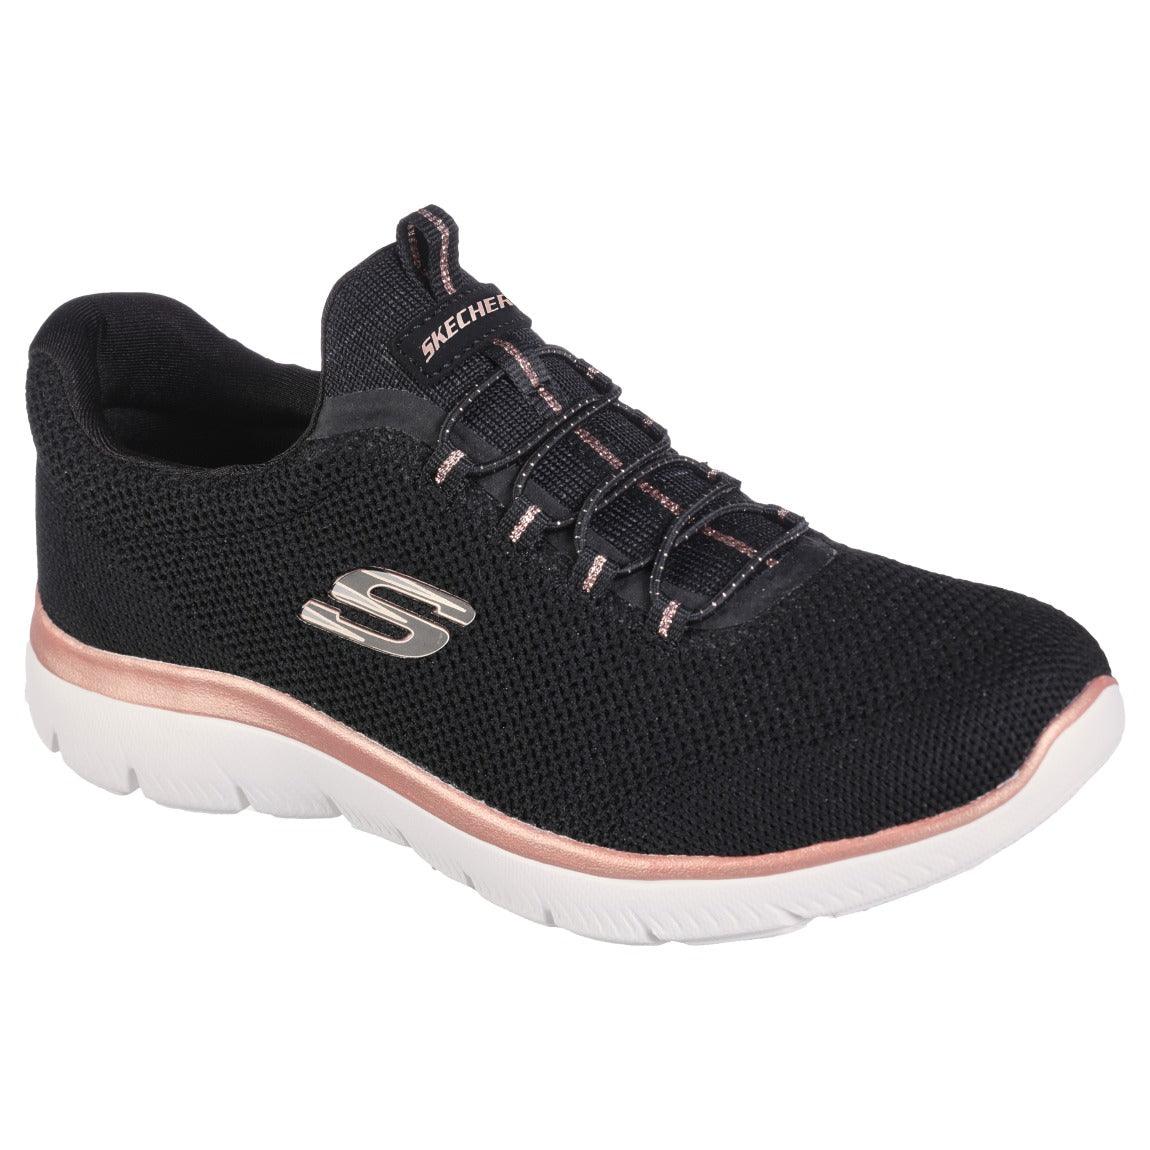 Summit Cool Classic Shoes - Women's - Sports Excellence